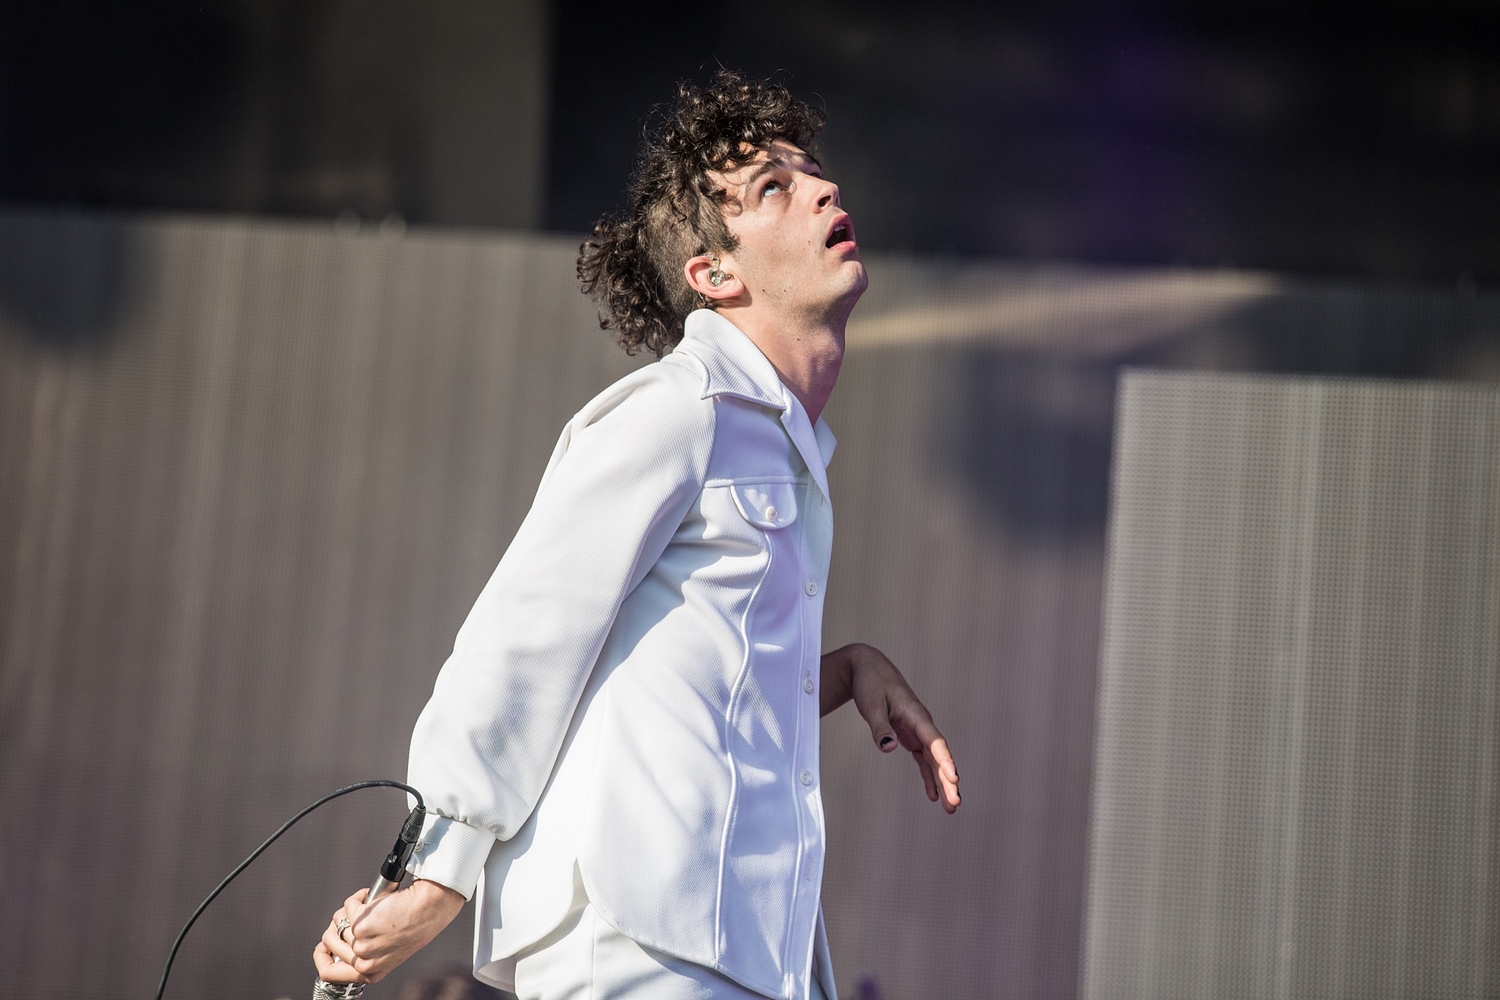 And we all go hand in hand to watch The 1975 play Parklife